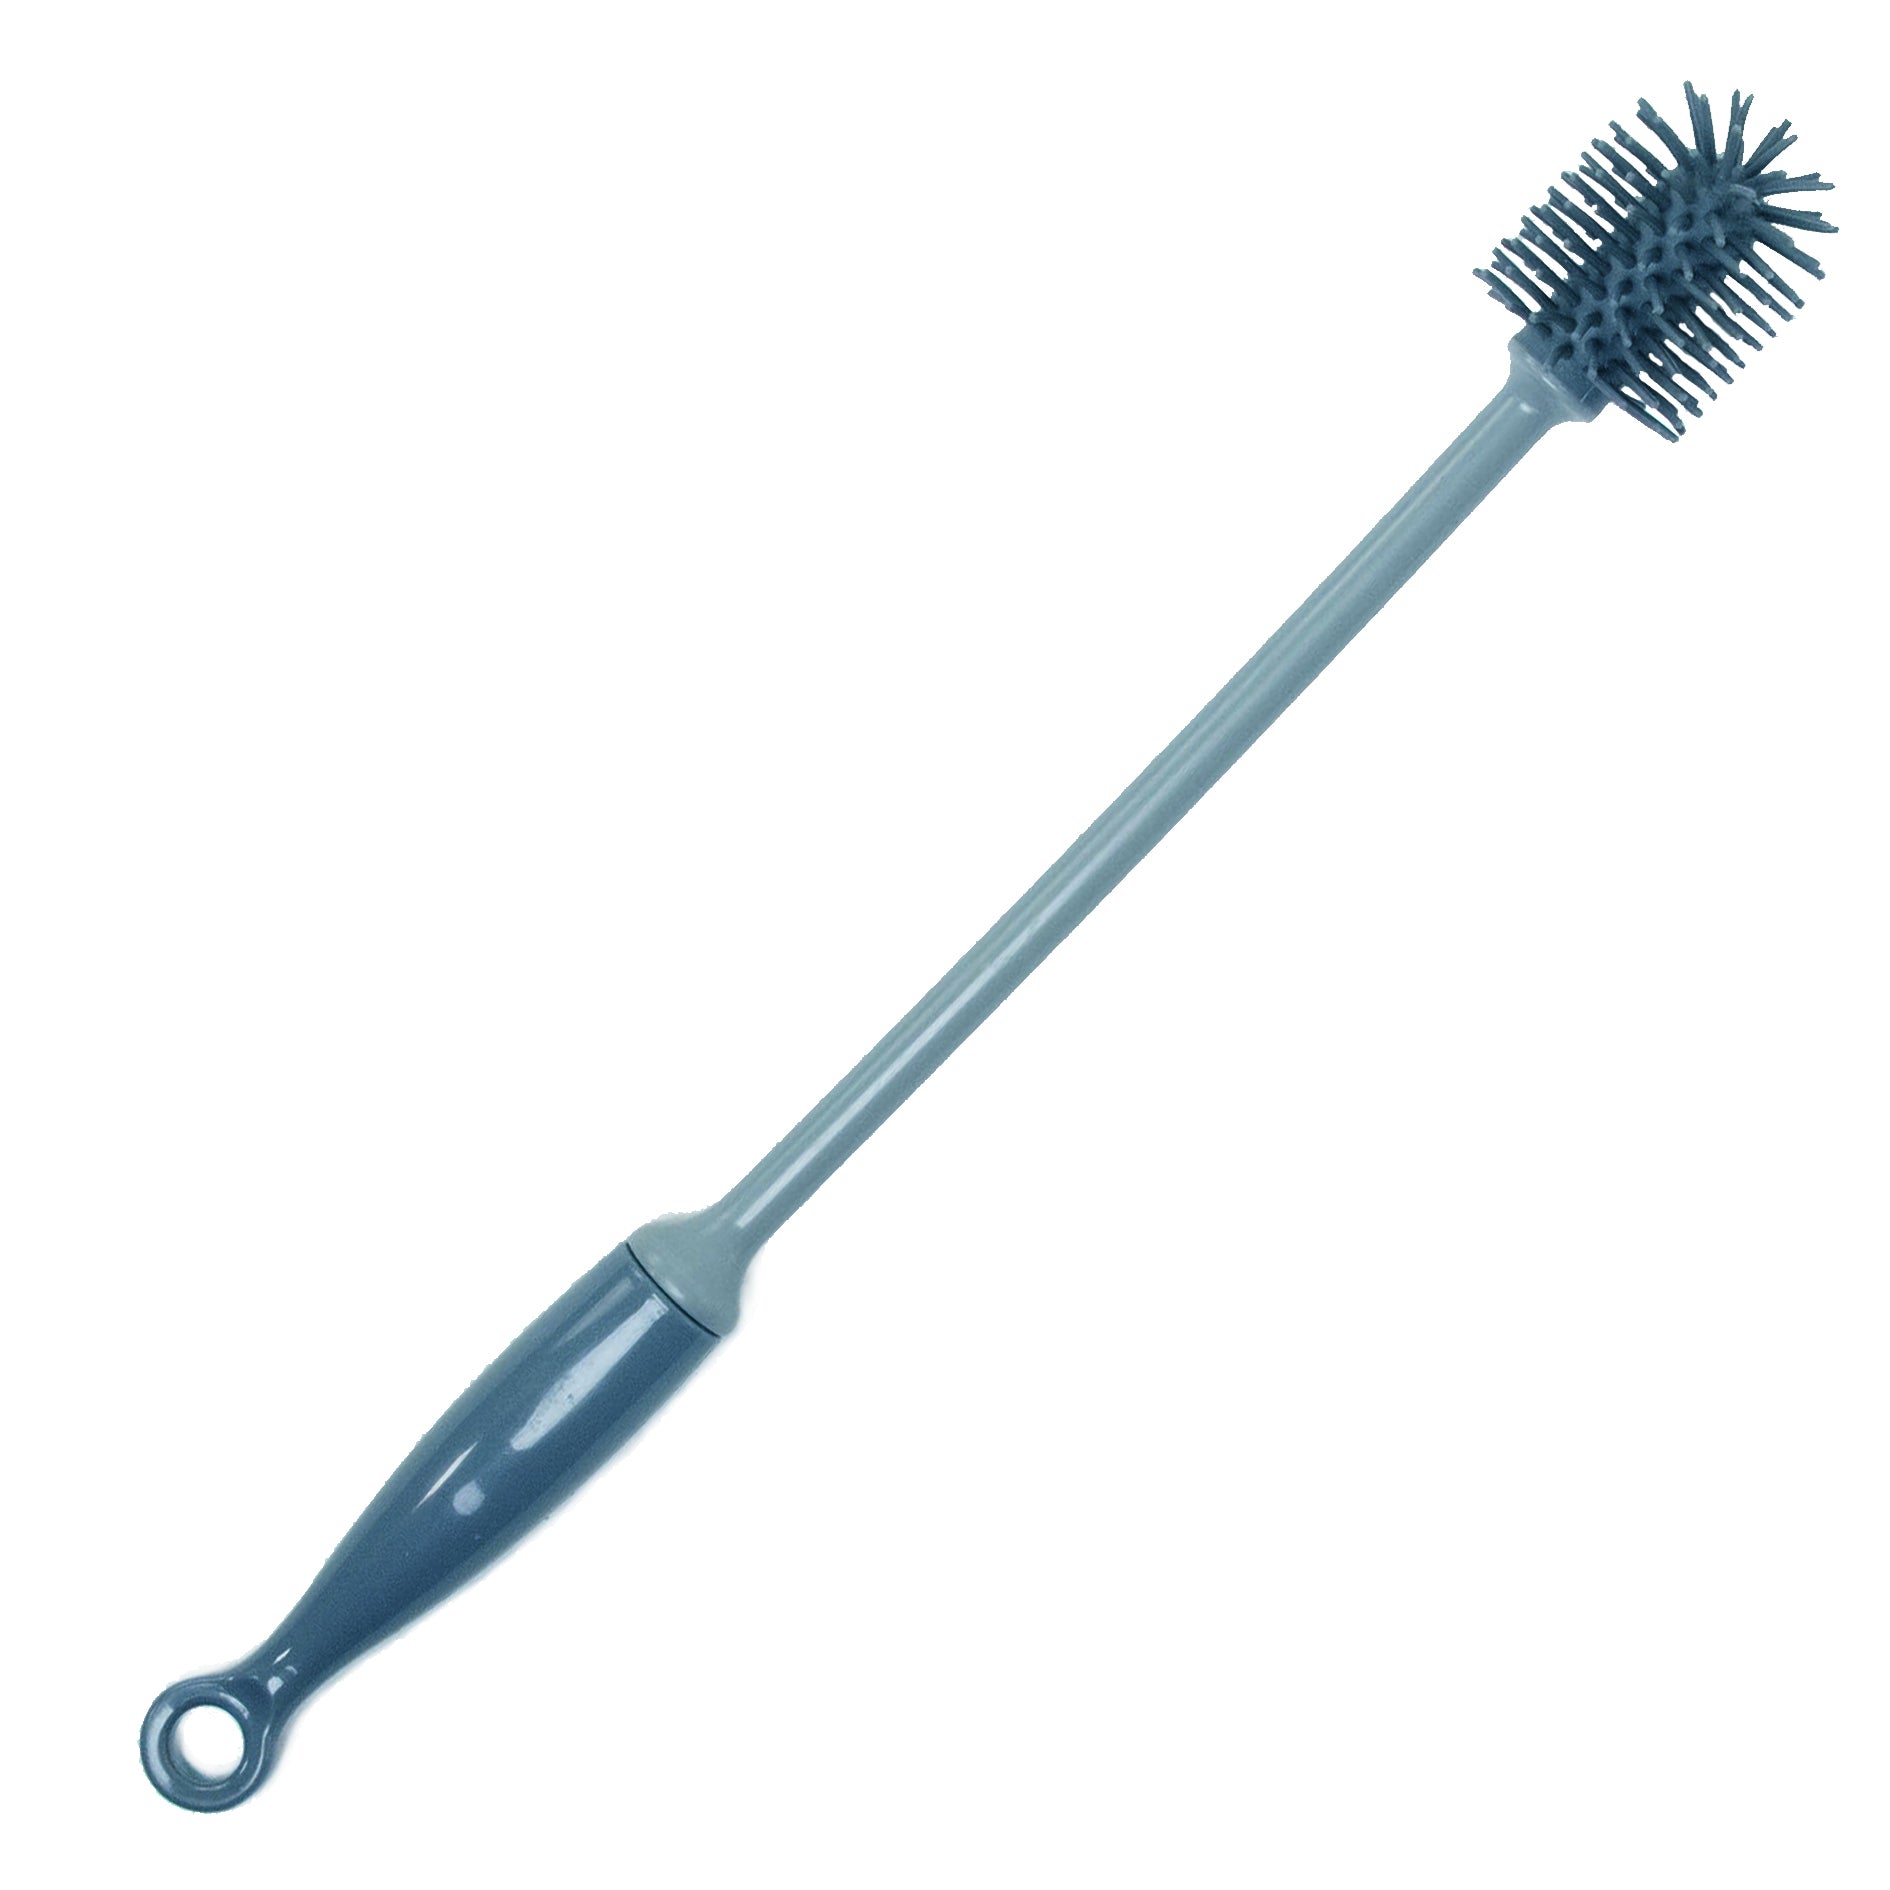 Flexi Waste Pipe Cleaning Brush